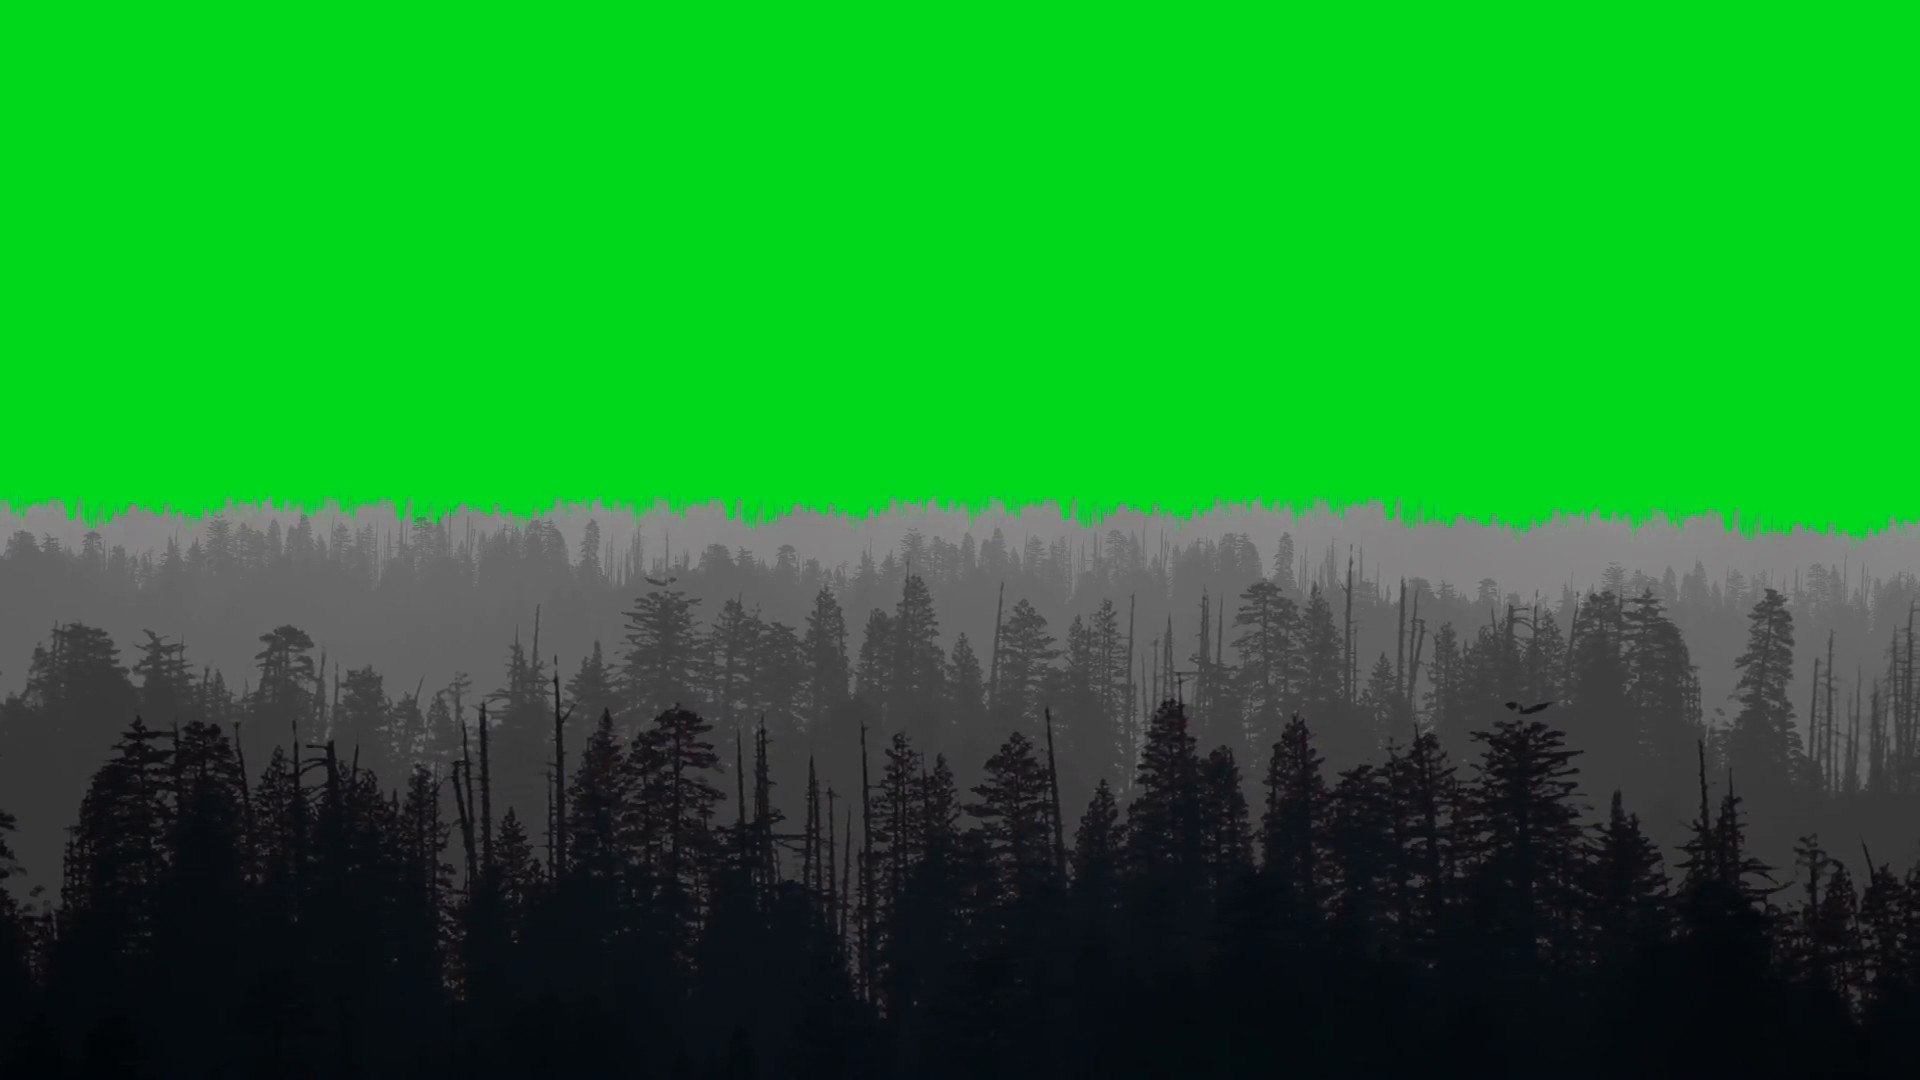 1920x1080 Animated Forest on a Green Screen Background Motion Background - VideoBlocks